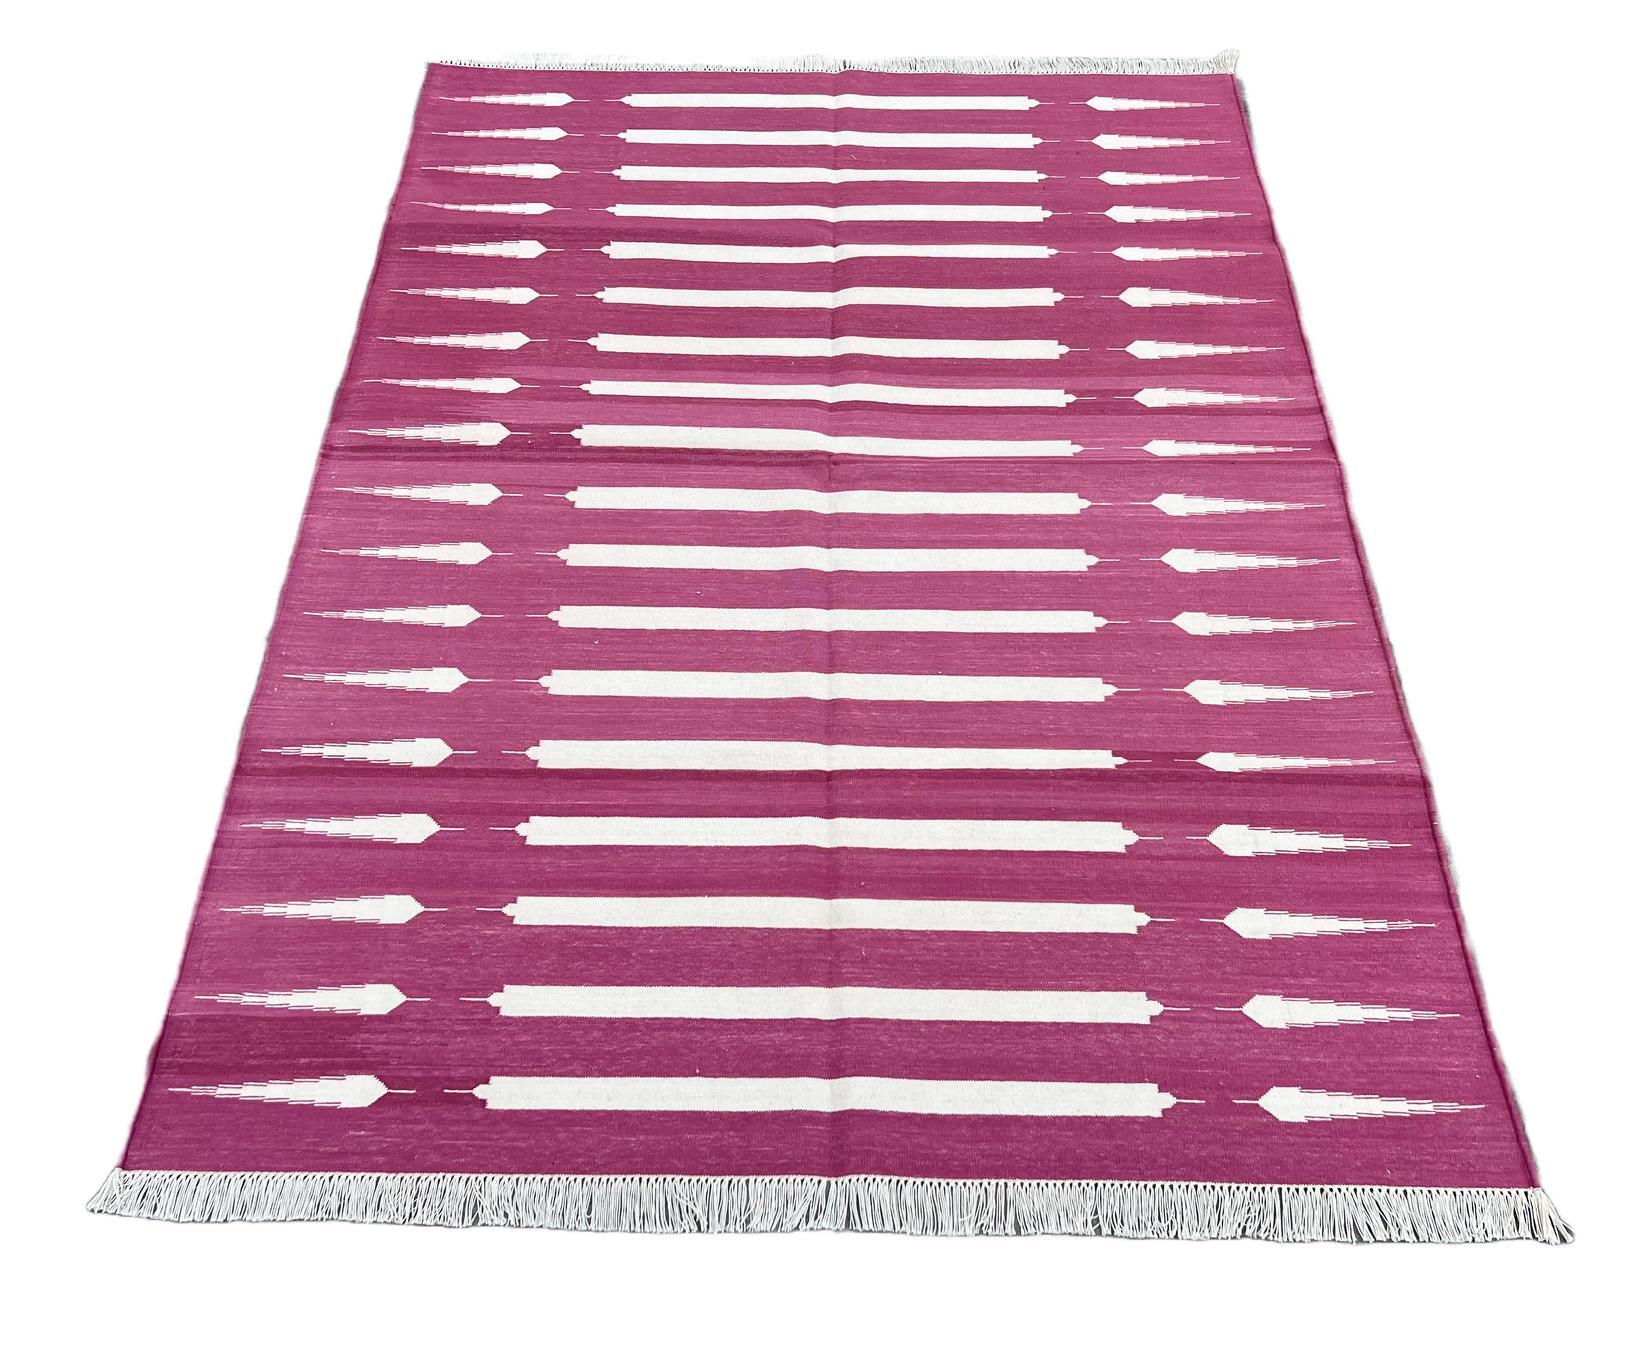 Contemporary Handmade Cotton Area Flat Weave Rug, 4x6 Pink And White Striped Indian Dhurrie For Sale